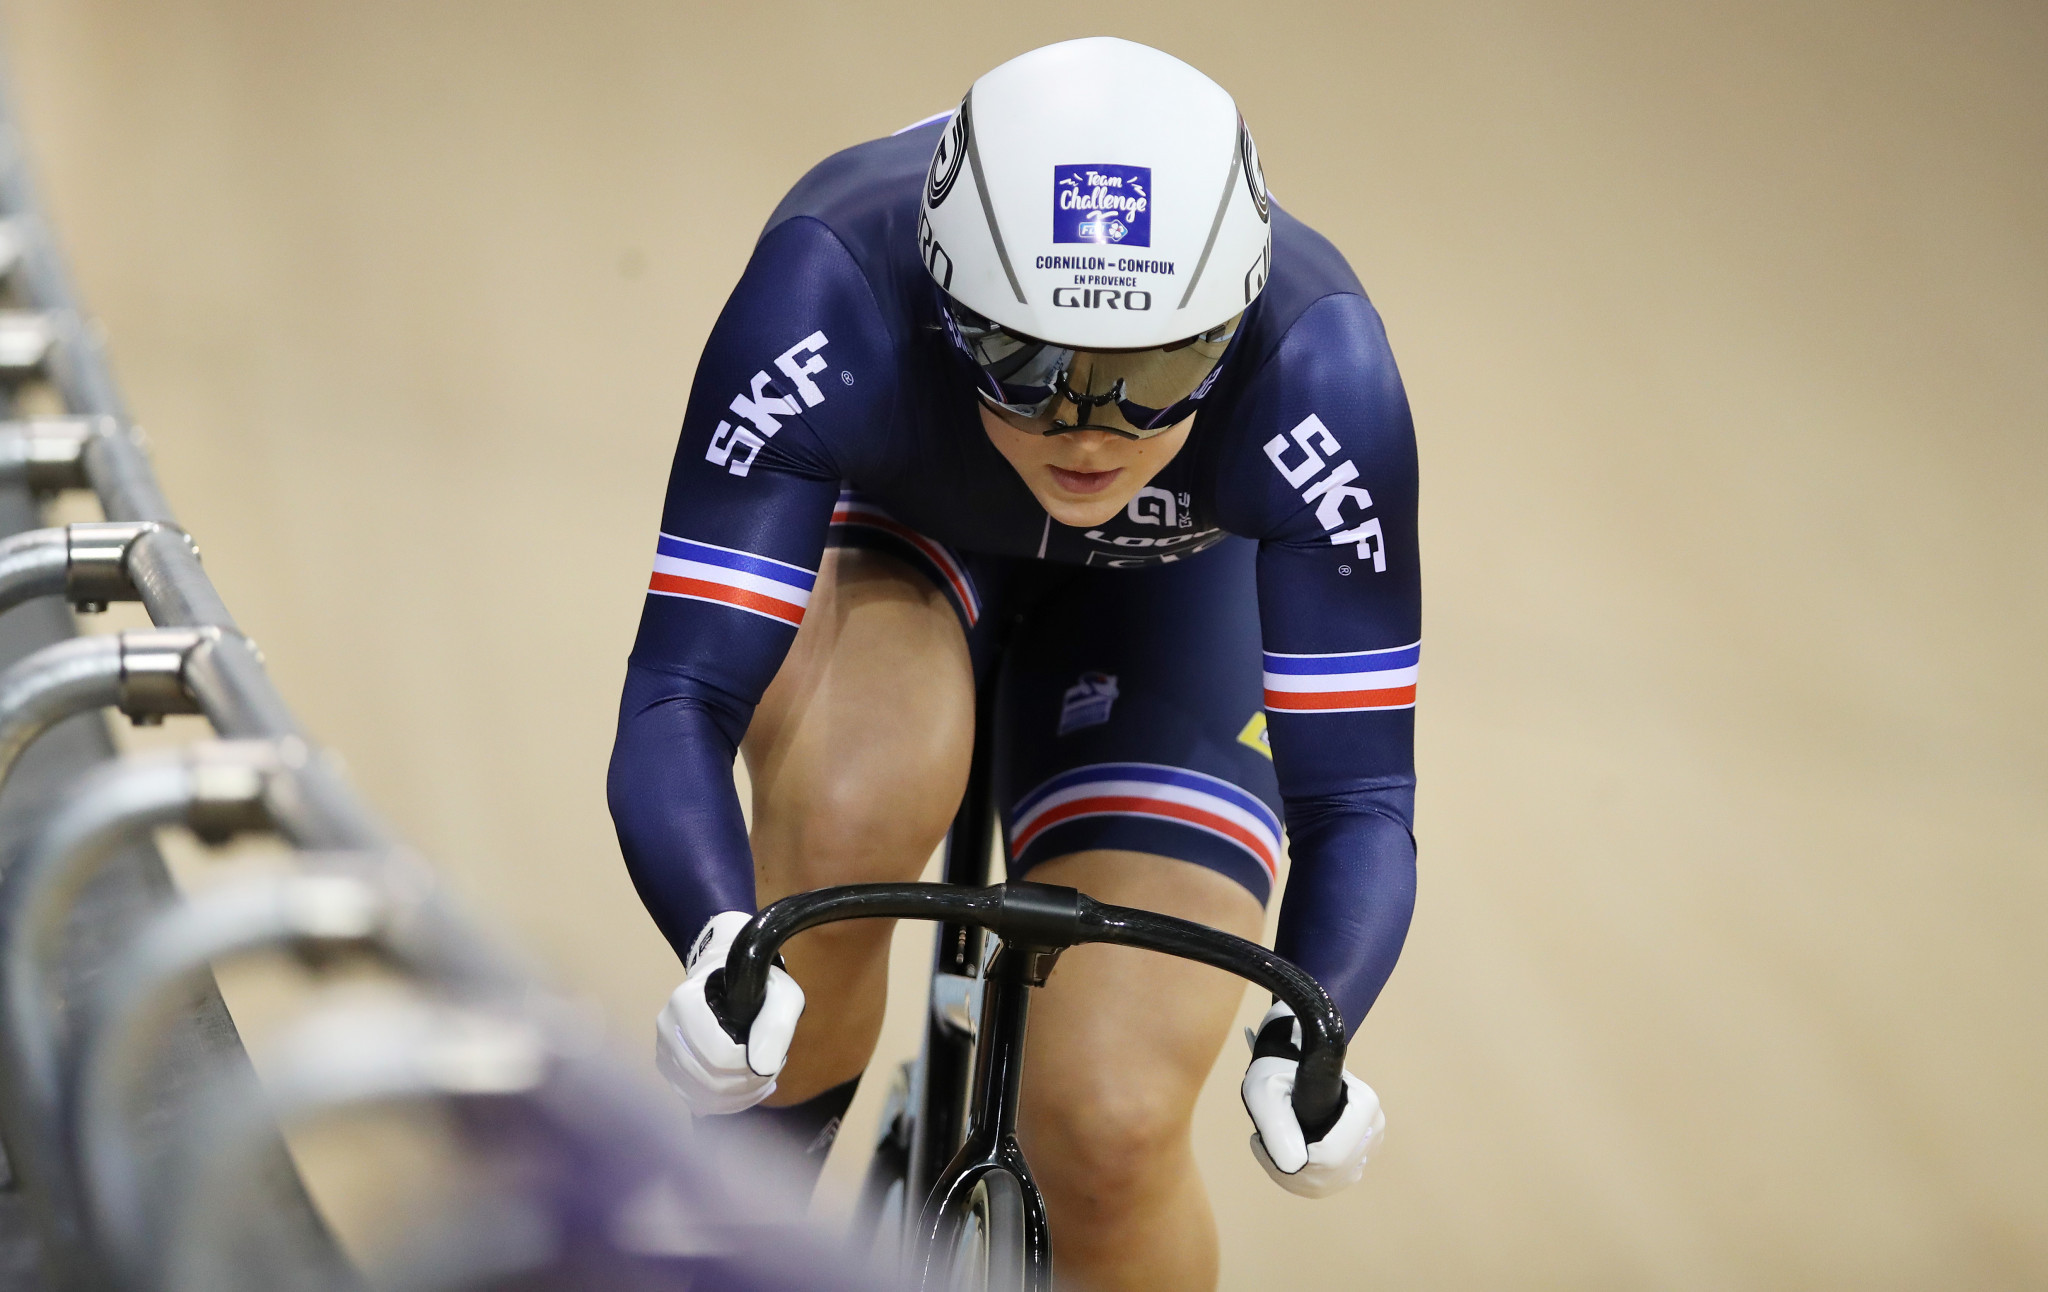 Milton to host final event of UCI Track World Cup season